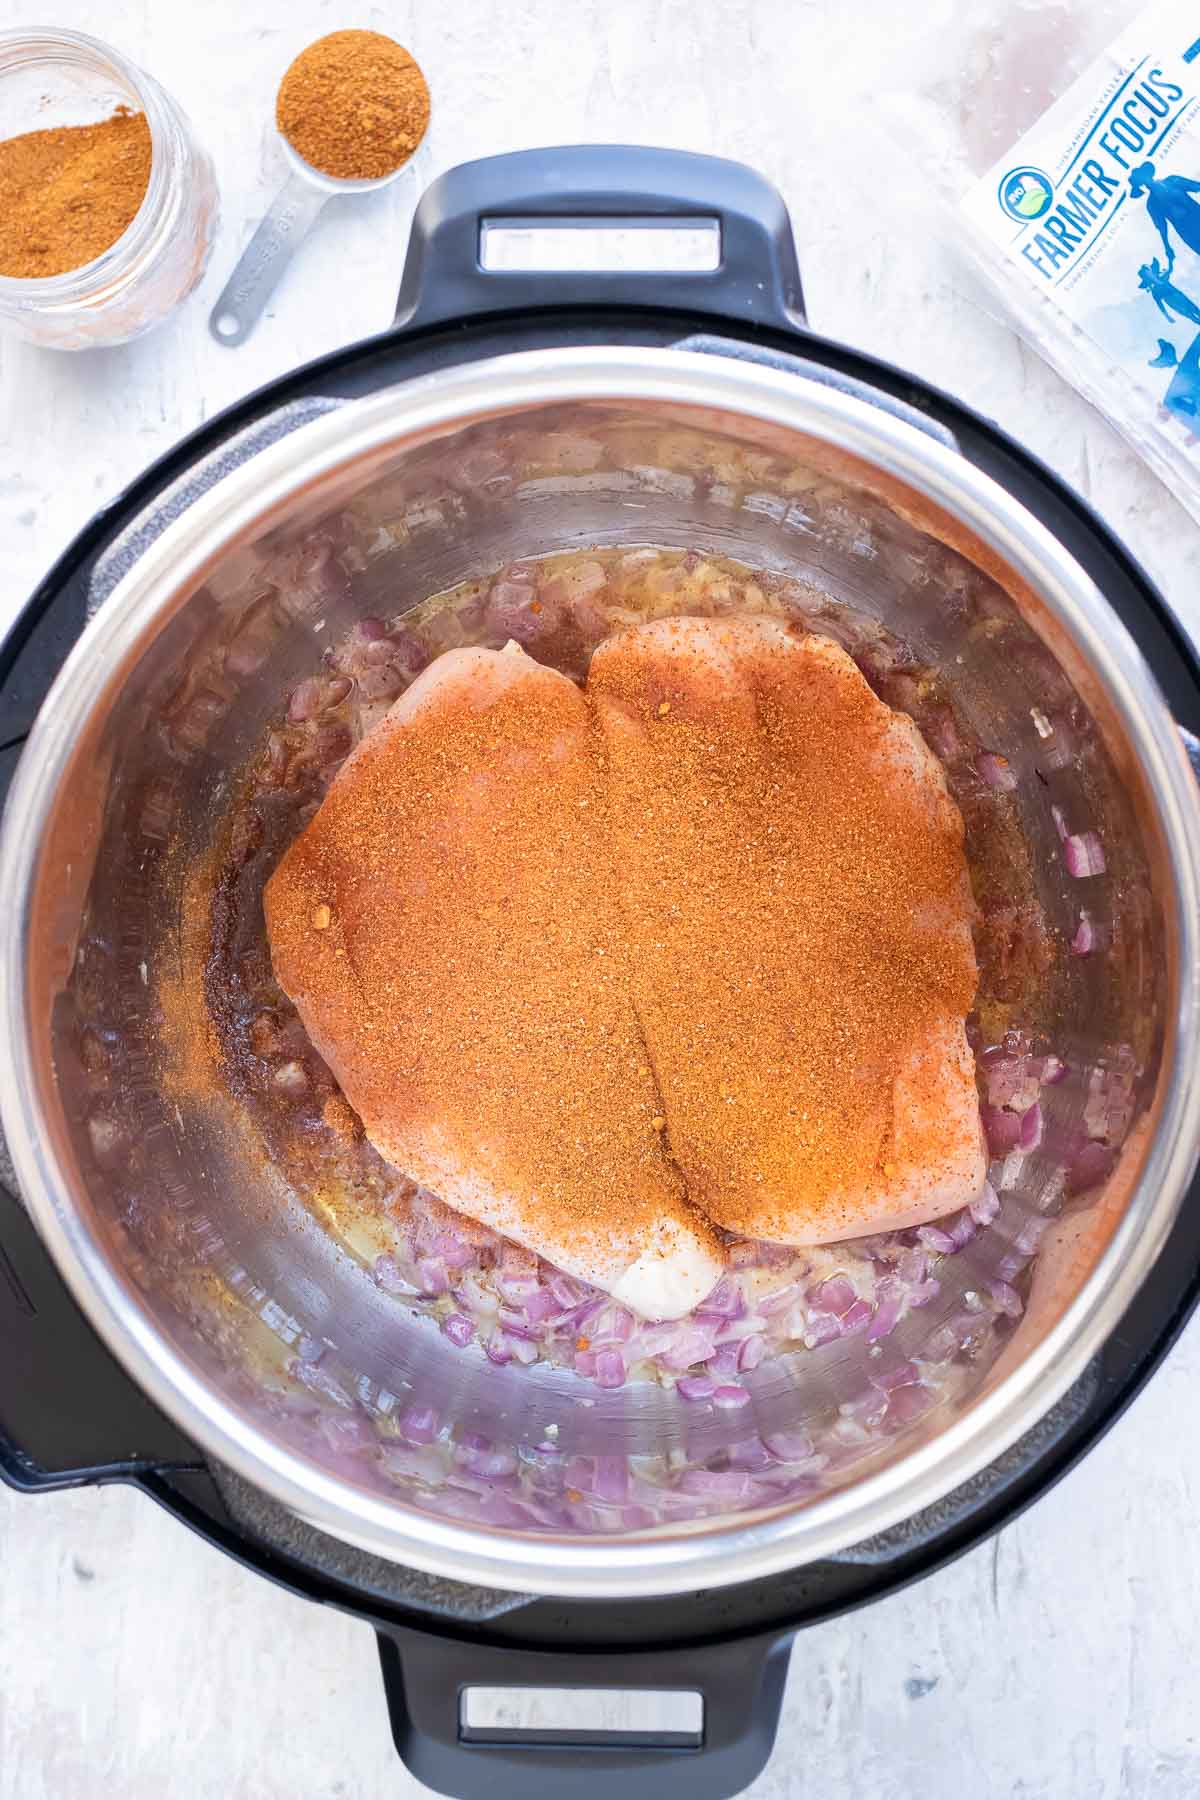 Taco Seasoning is sprinkled over the chicken breast in the Instant Pot.